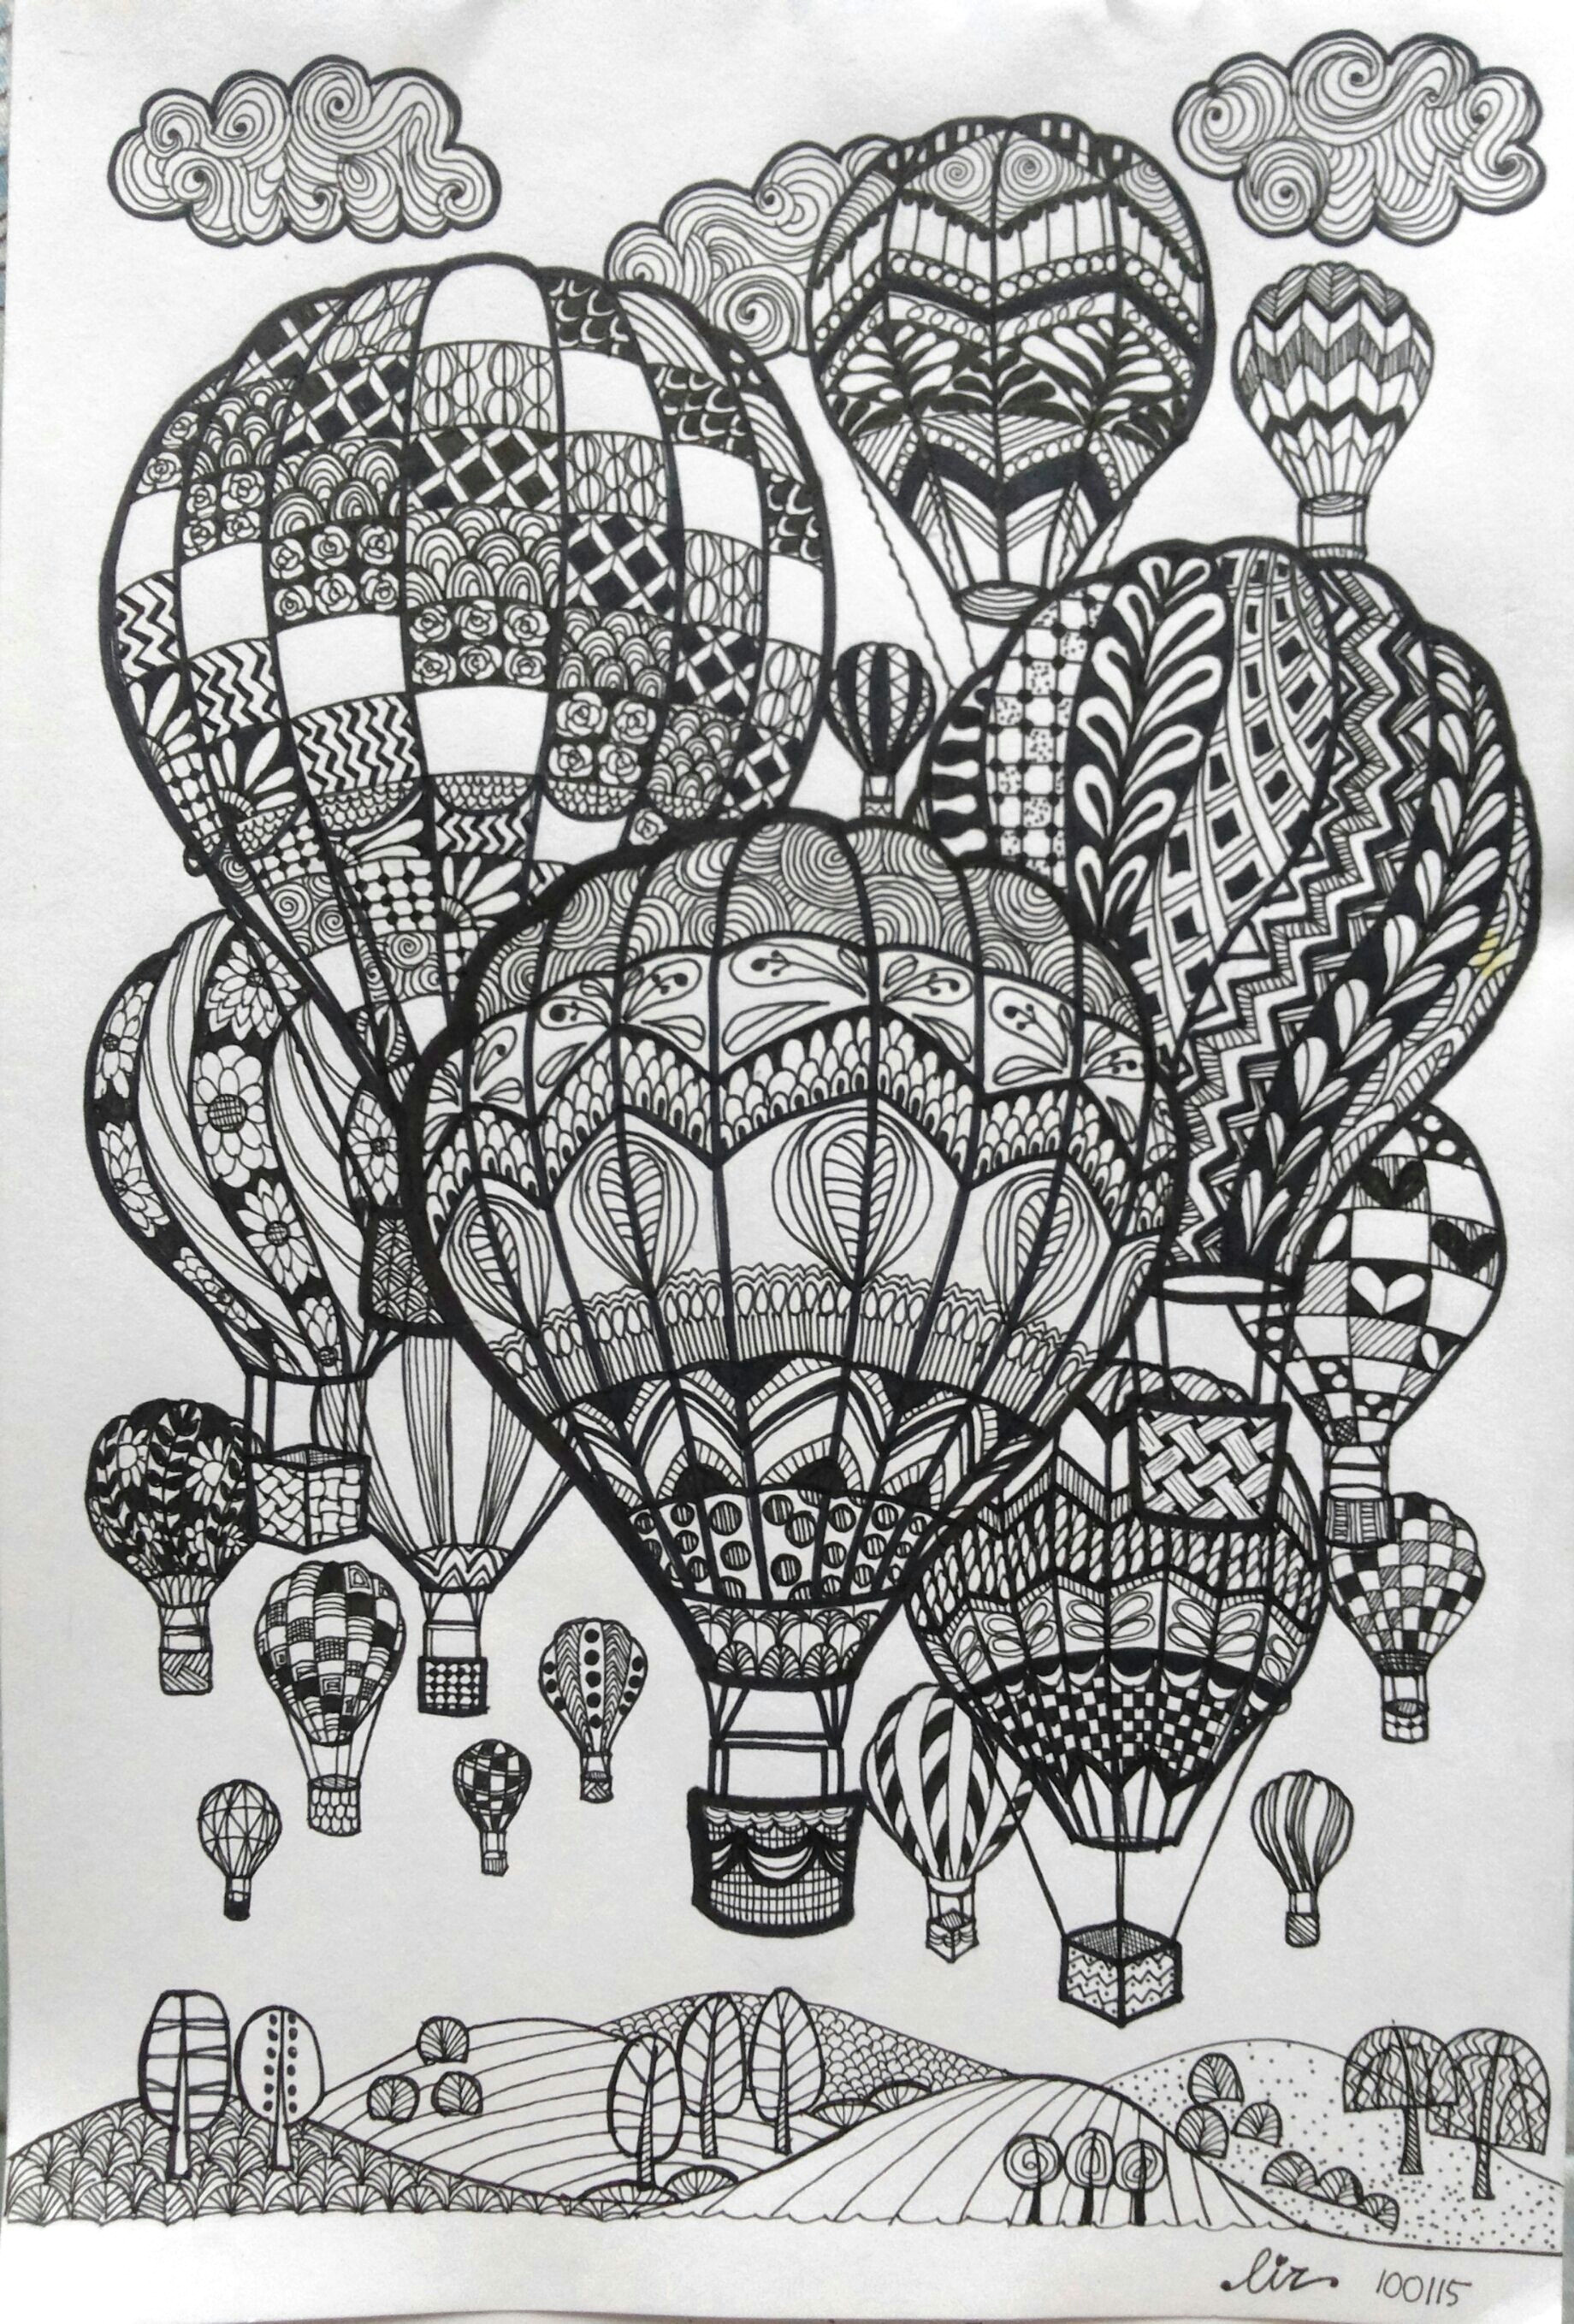 Drawing Eyes On Balloons Hot Air Balloons Doodle Art Doodle and Zentangle Doodle Art Art